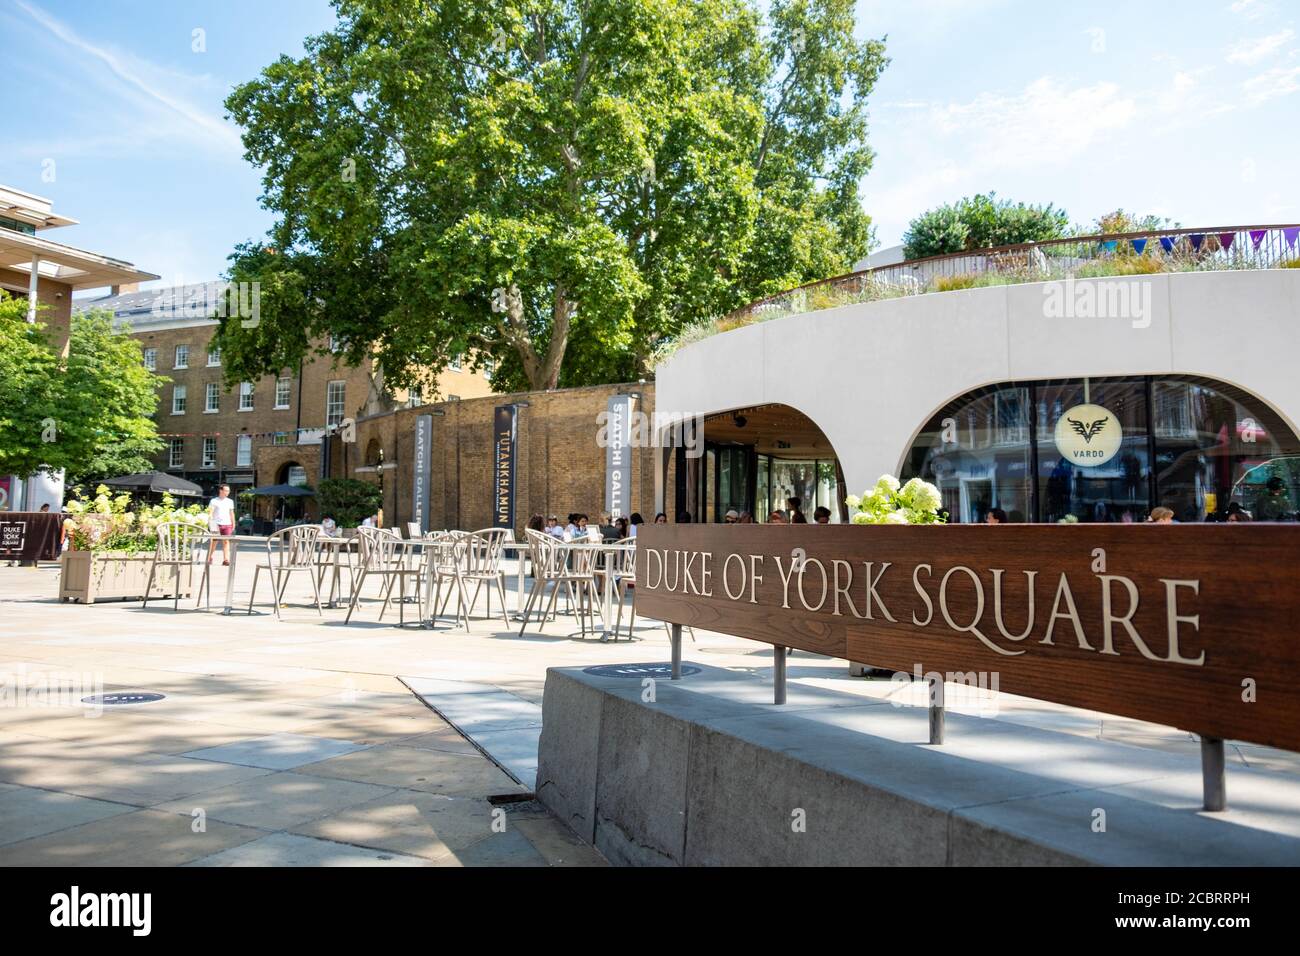 London- August, 2020: Duke of York Square on the Kings Road, Chelsea - London. An upmarket retail and leisure area Stock Photo